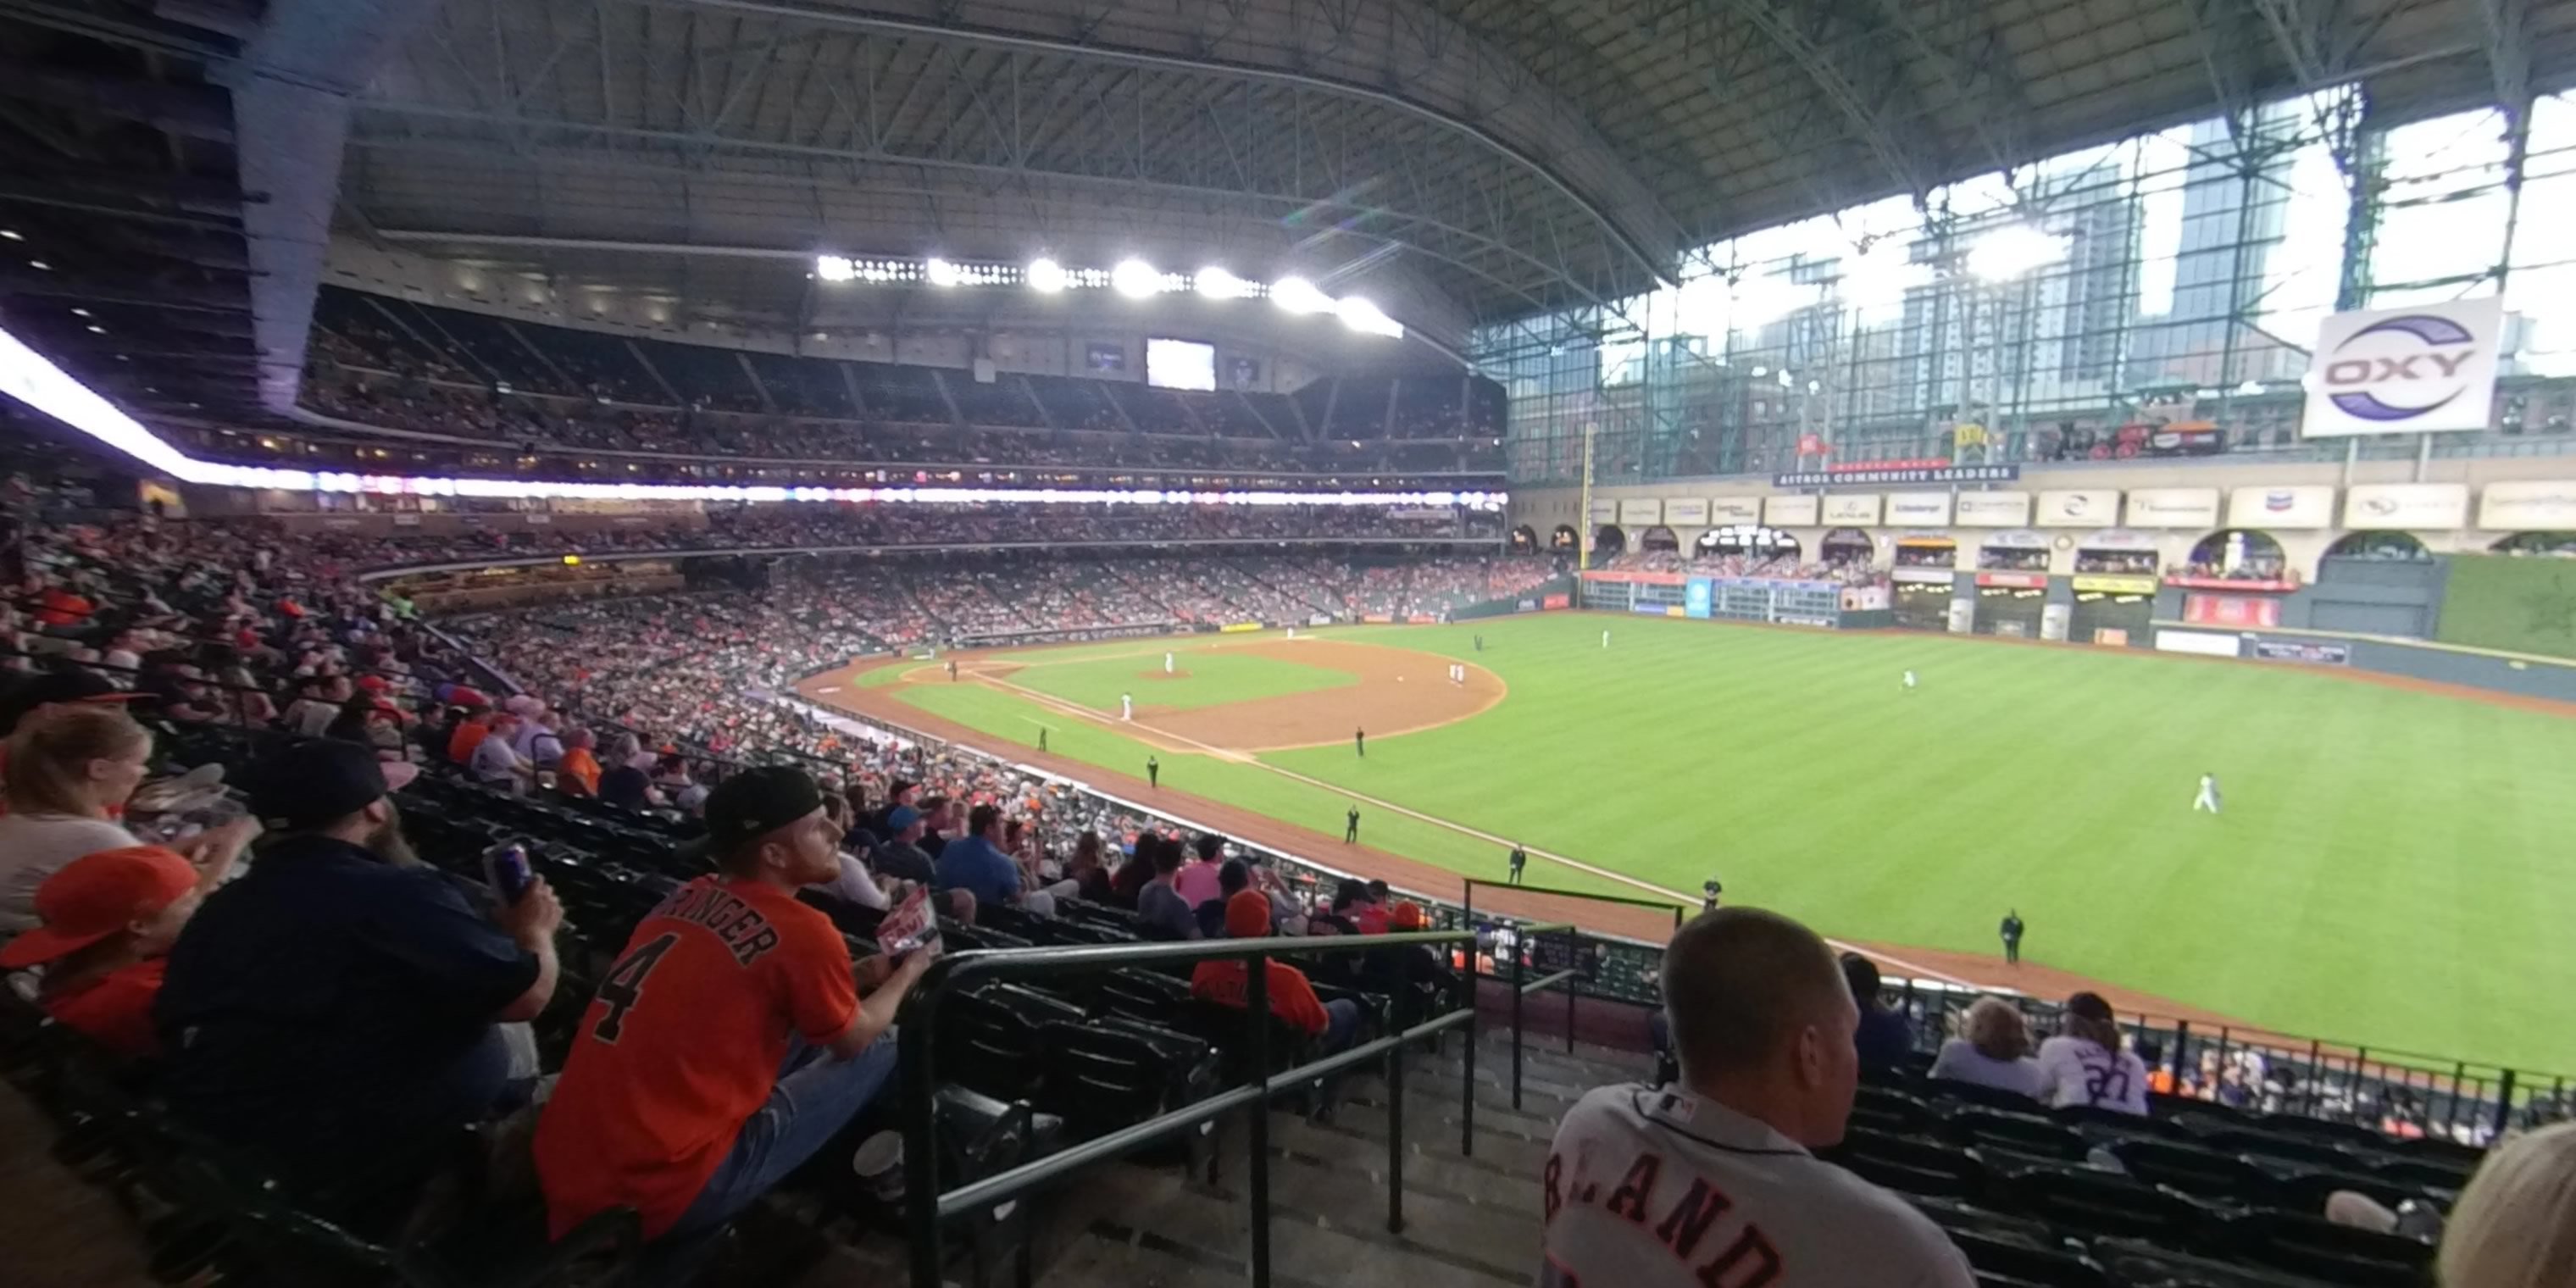 section 231 panoramic seat view  for baseball - minute maid park